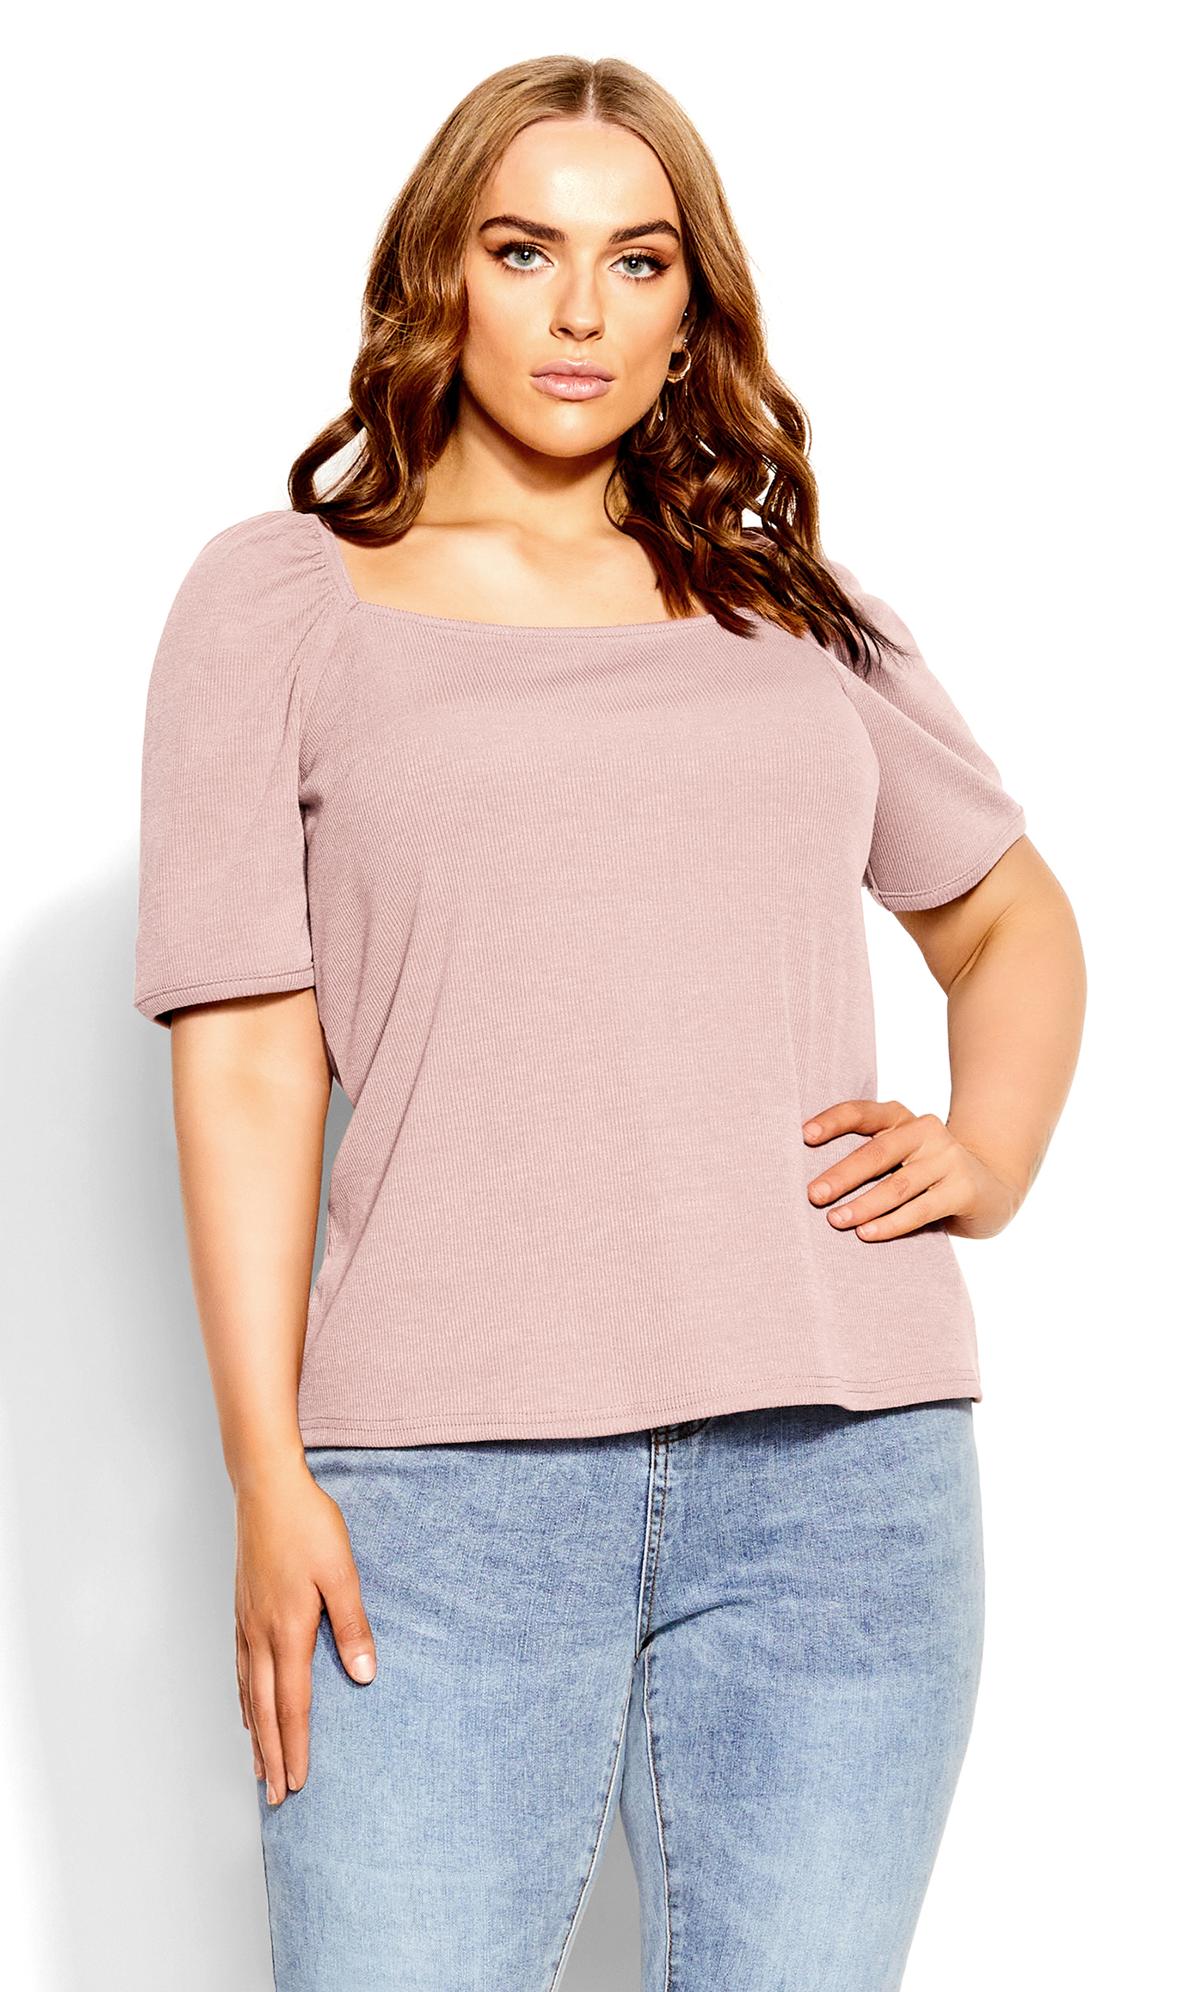  Dusty Rose Top